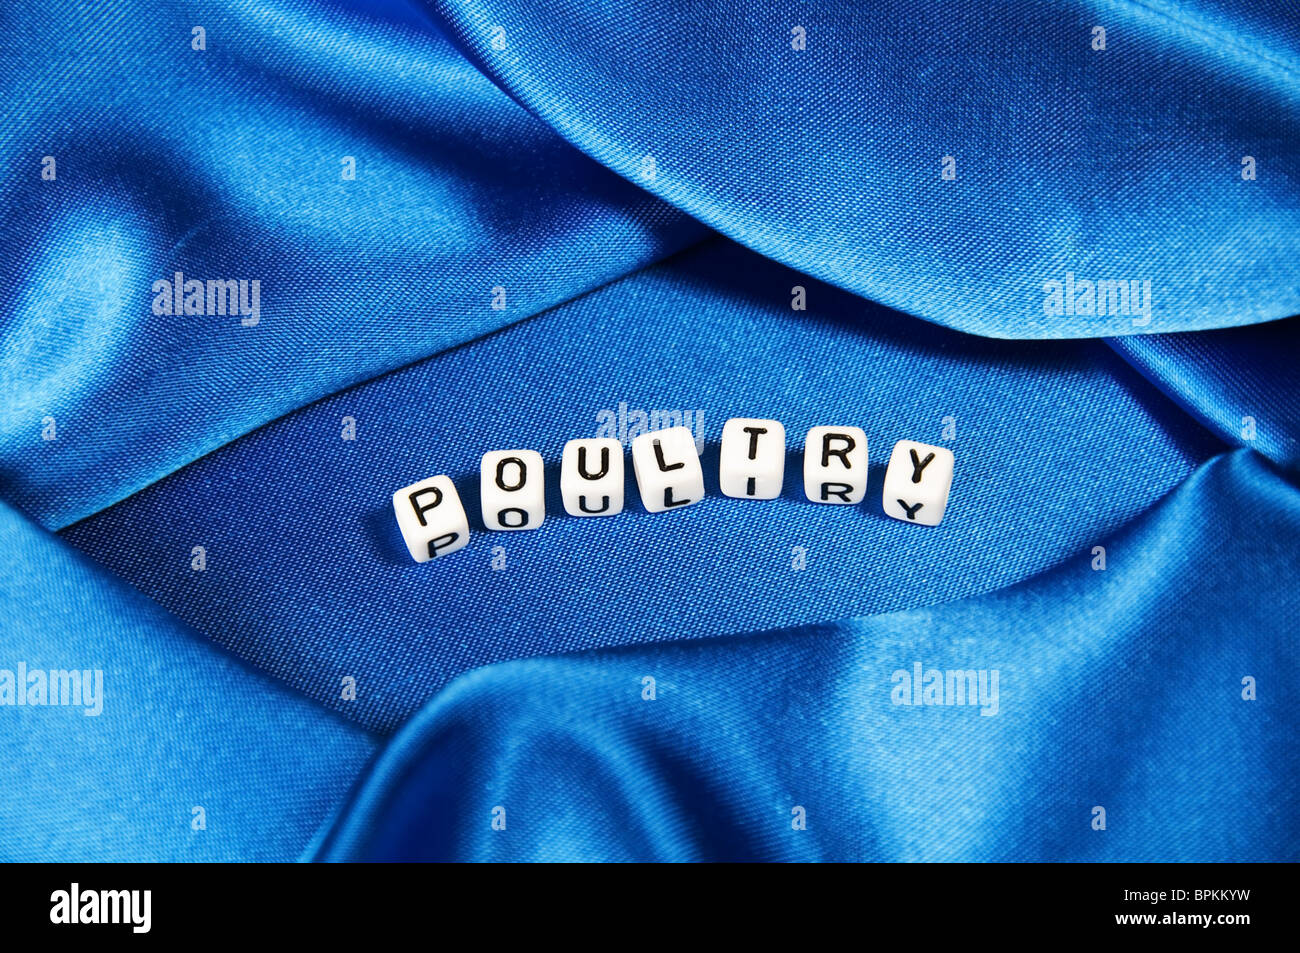 Royal blue satin background with rich folds and wrinkles for texture is the word poultry in lettering in this series. Stock Photo